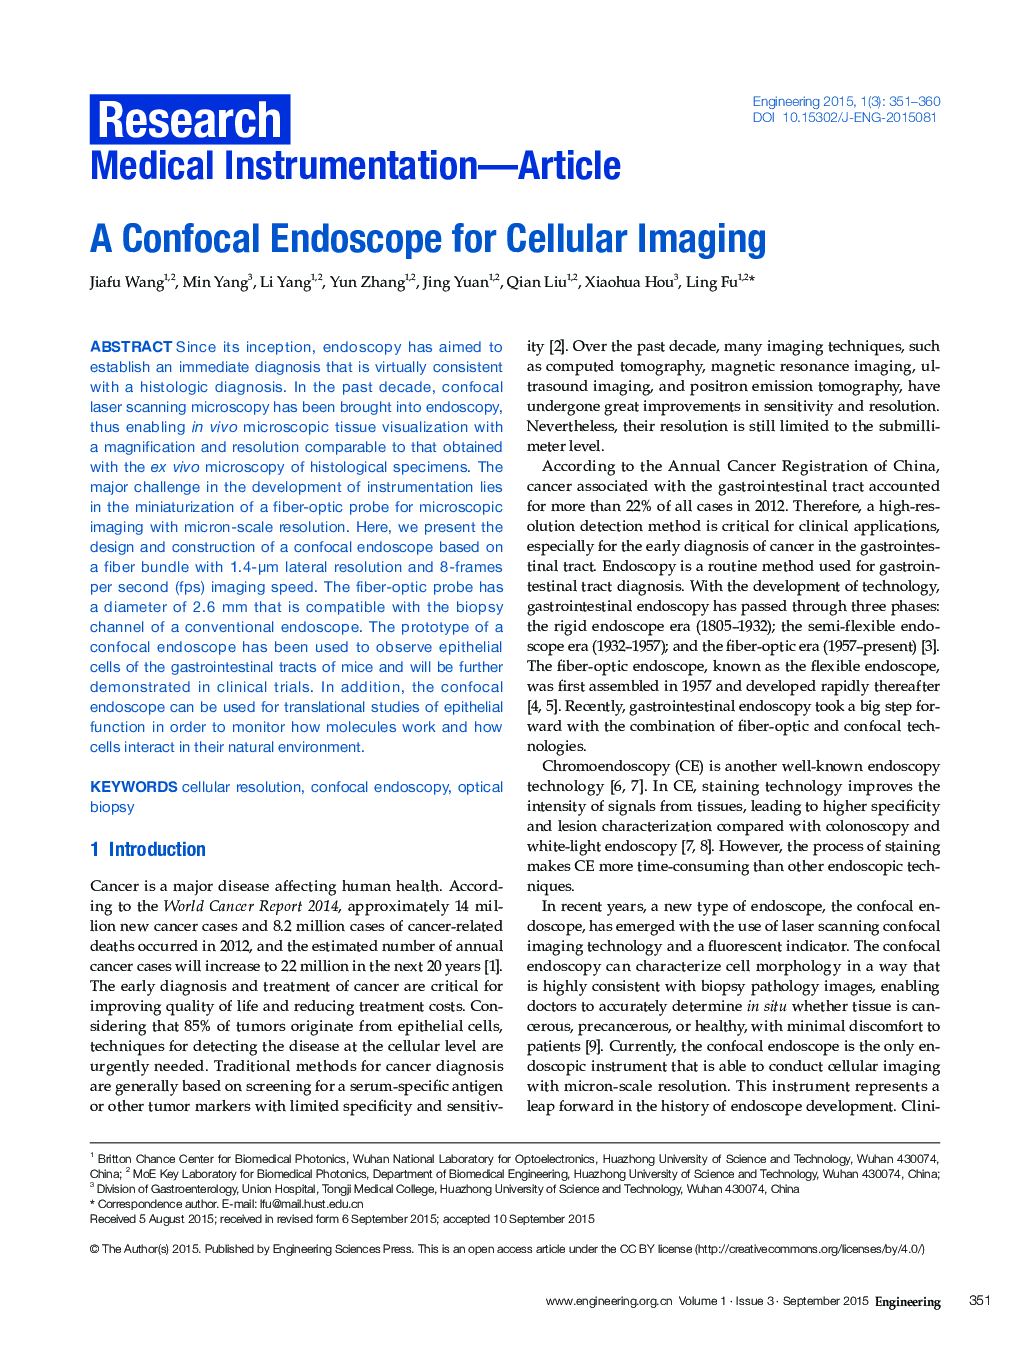 A Confocal Endoscope for Cellular Imaging